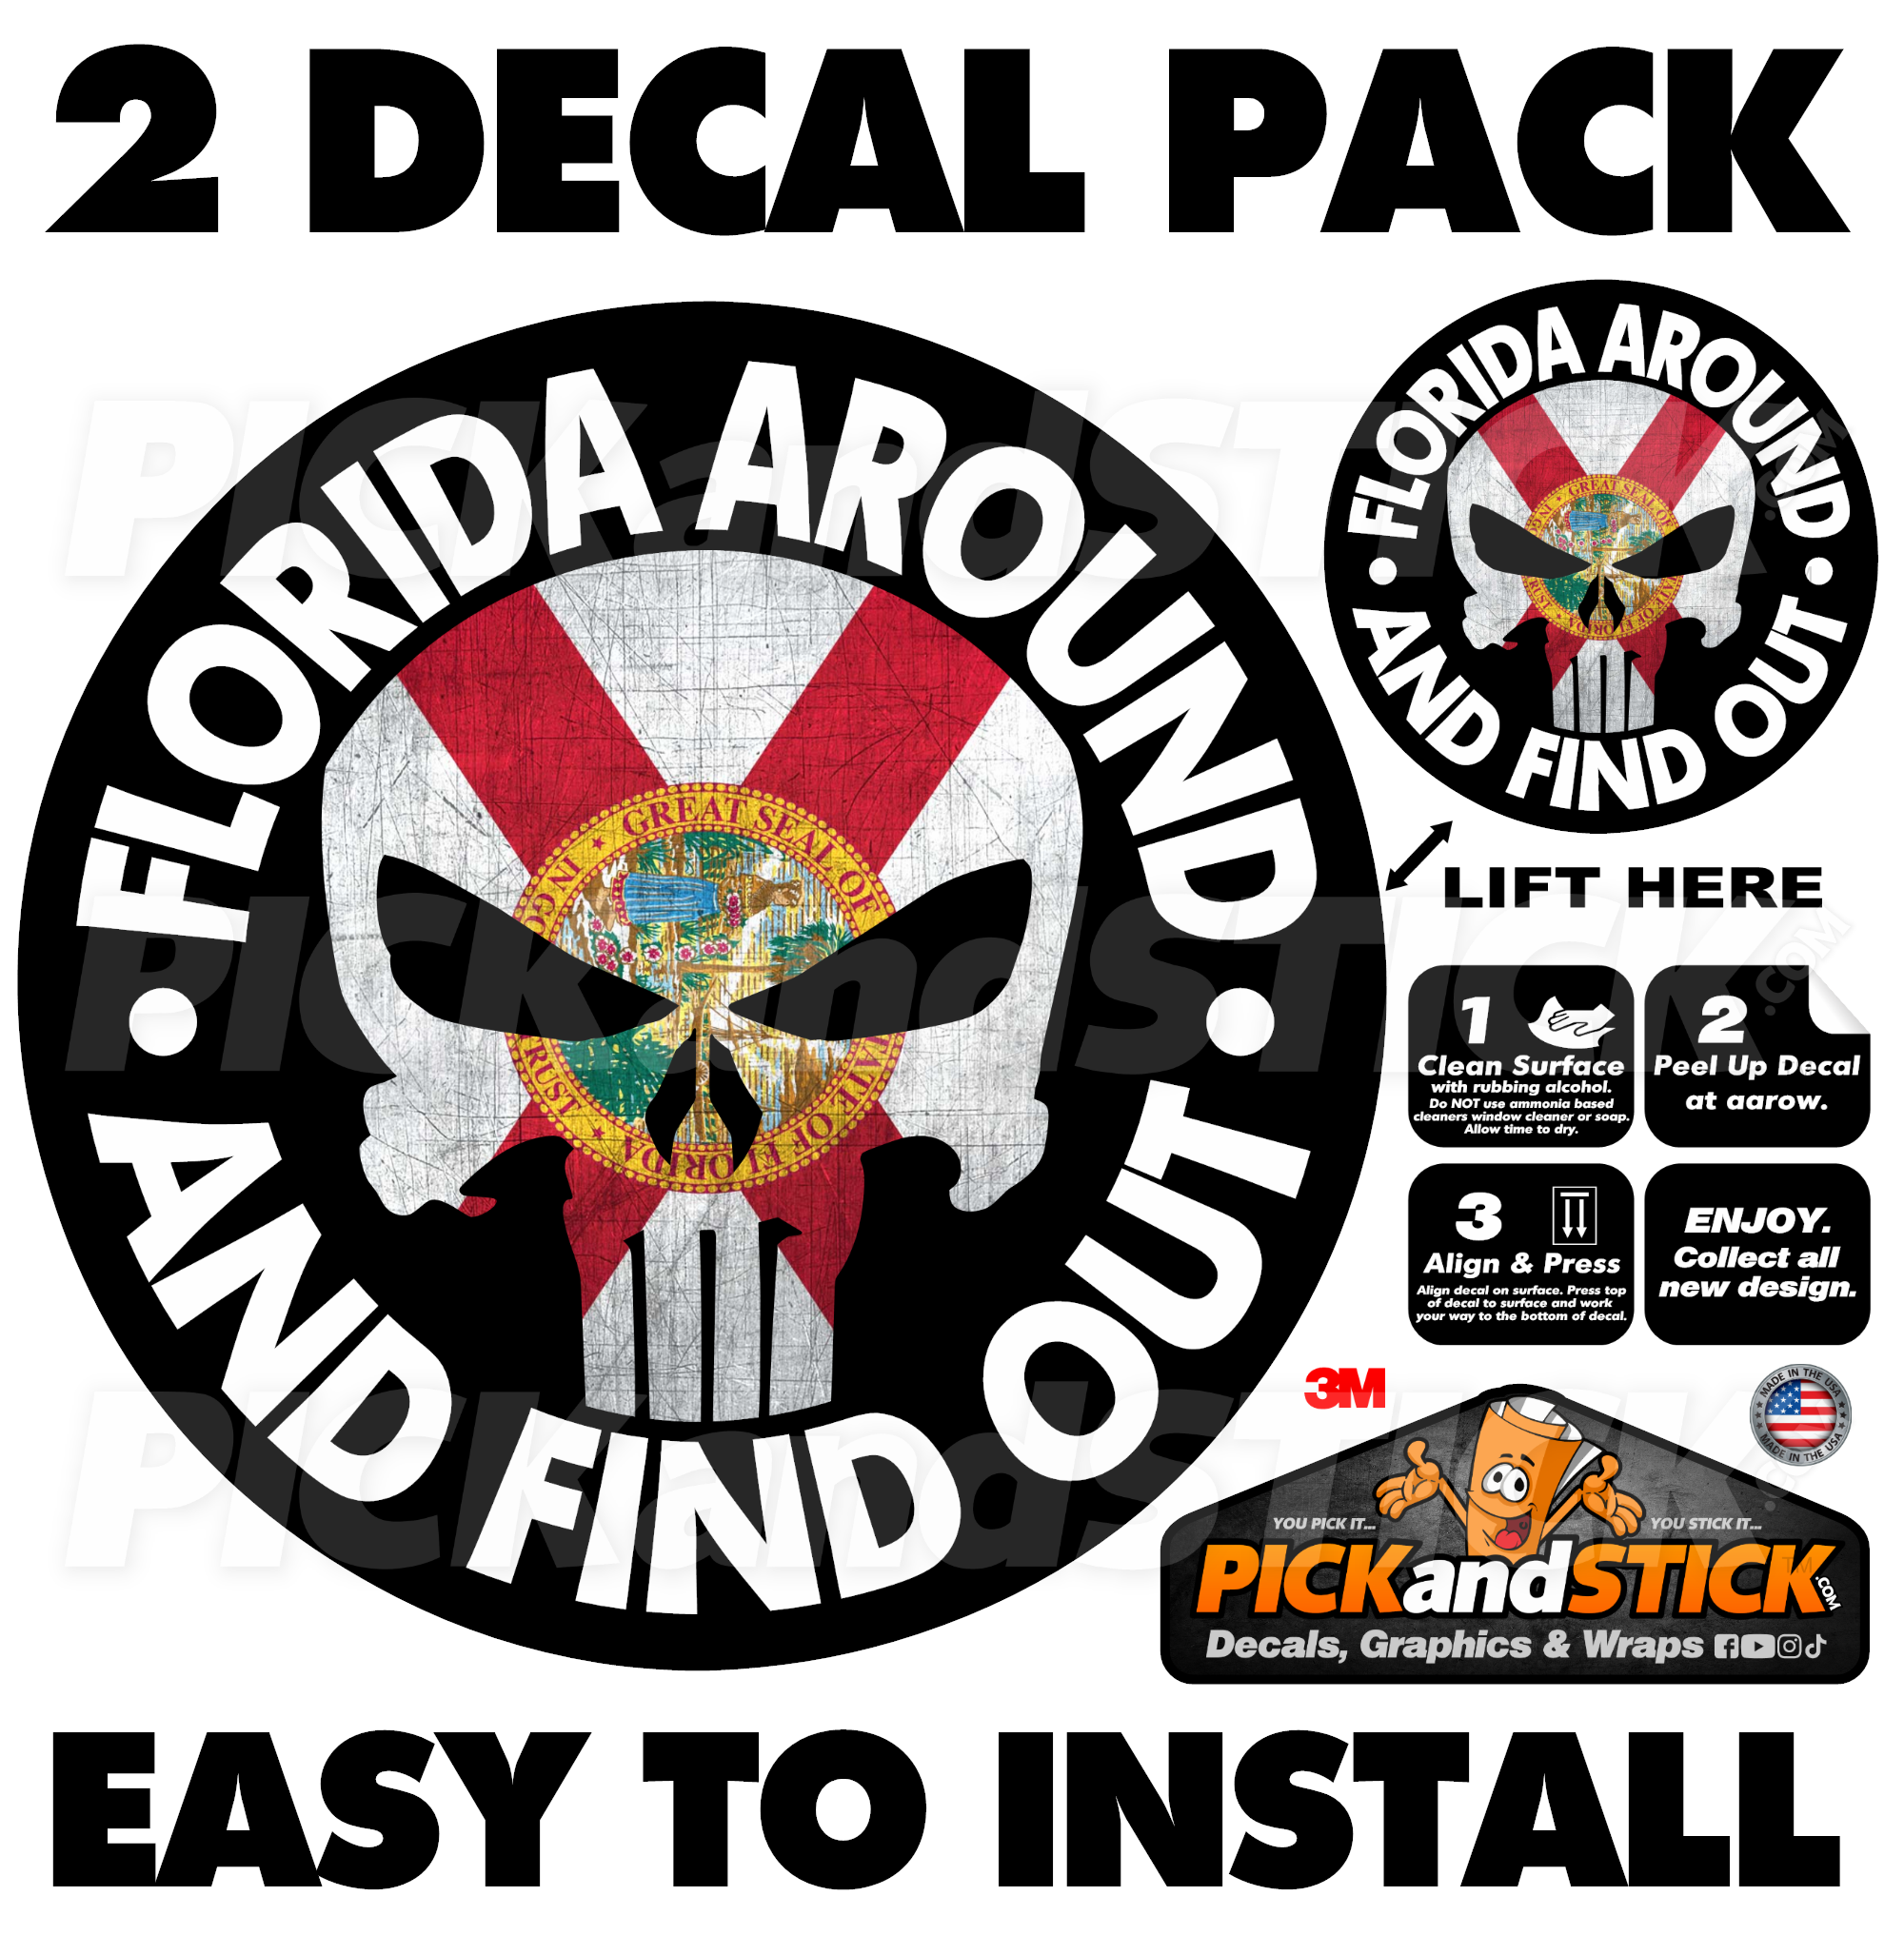 Florida Around And Find Out - 2 Decal Pack